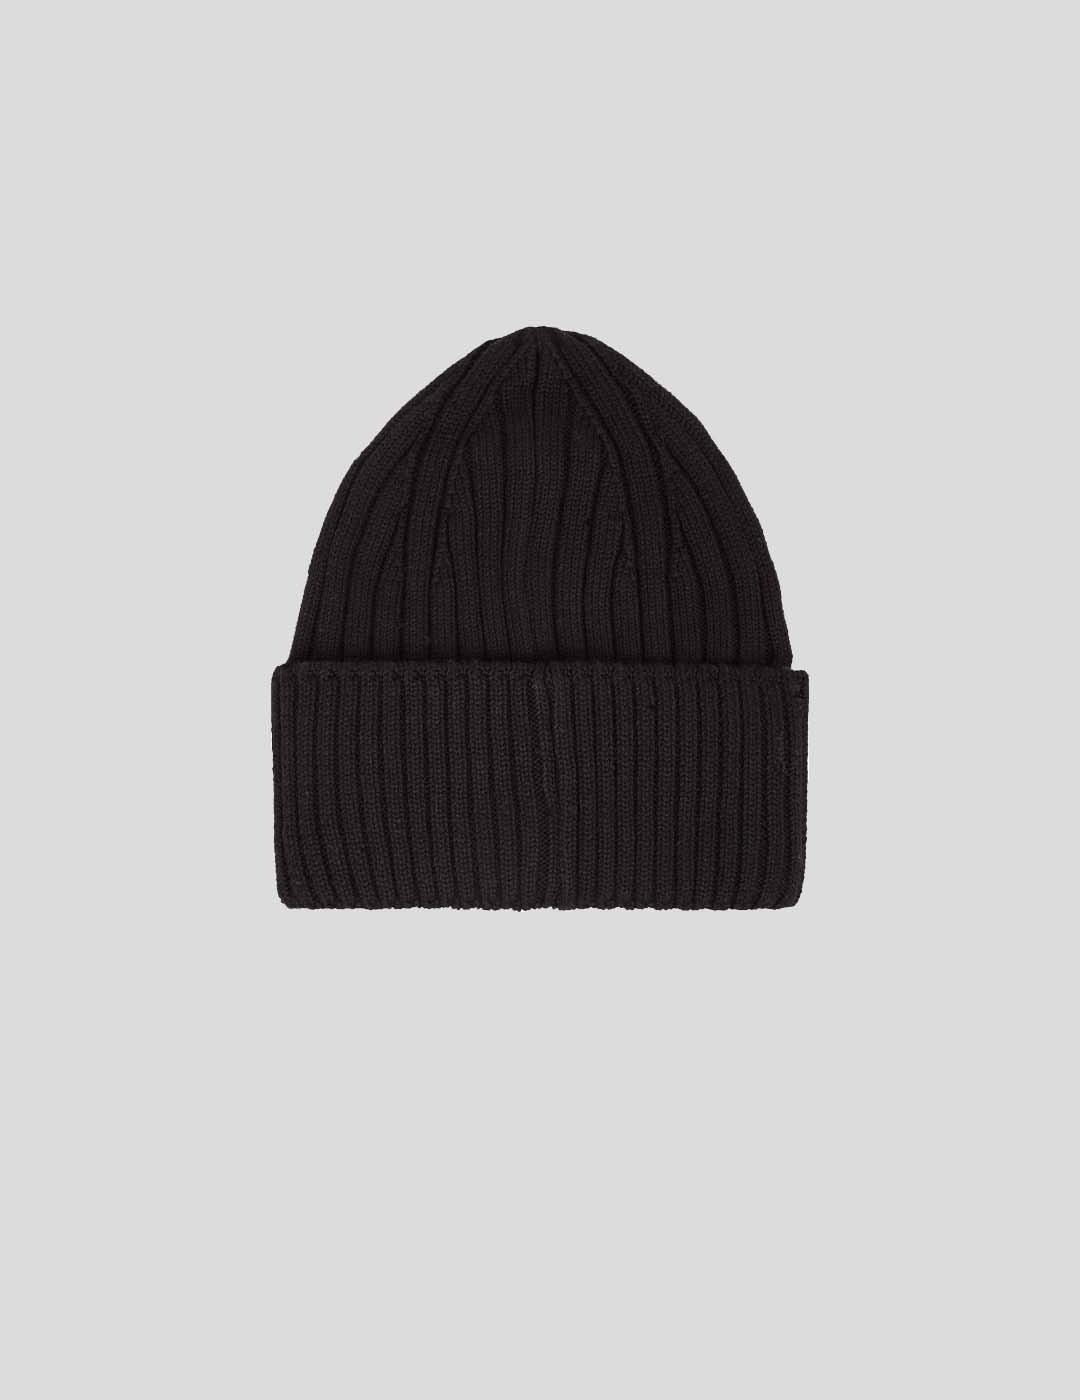 GORRO TOMMY JEANS HERITAGE ARCHIVE BEANIE  BLACK